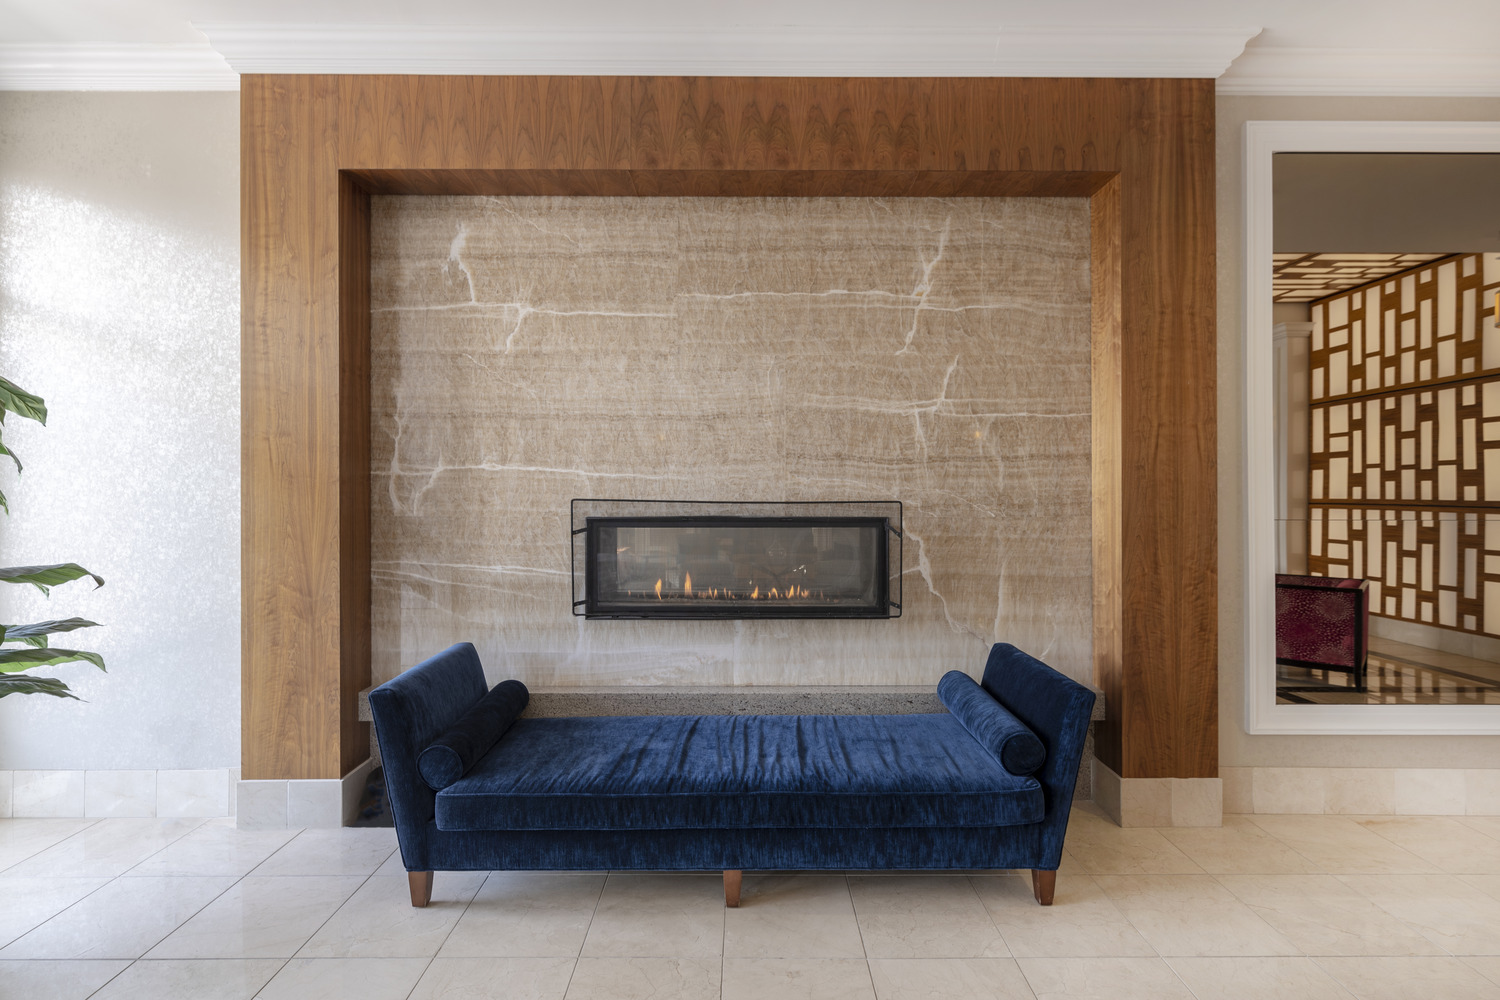 Watertown Mews : Beautiful, welcoming lobby with fireplace